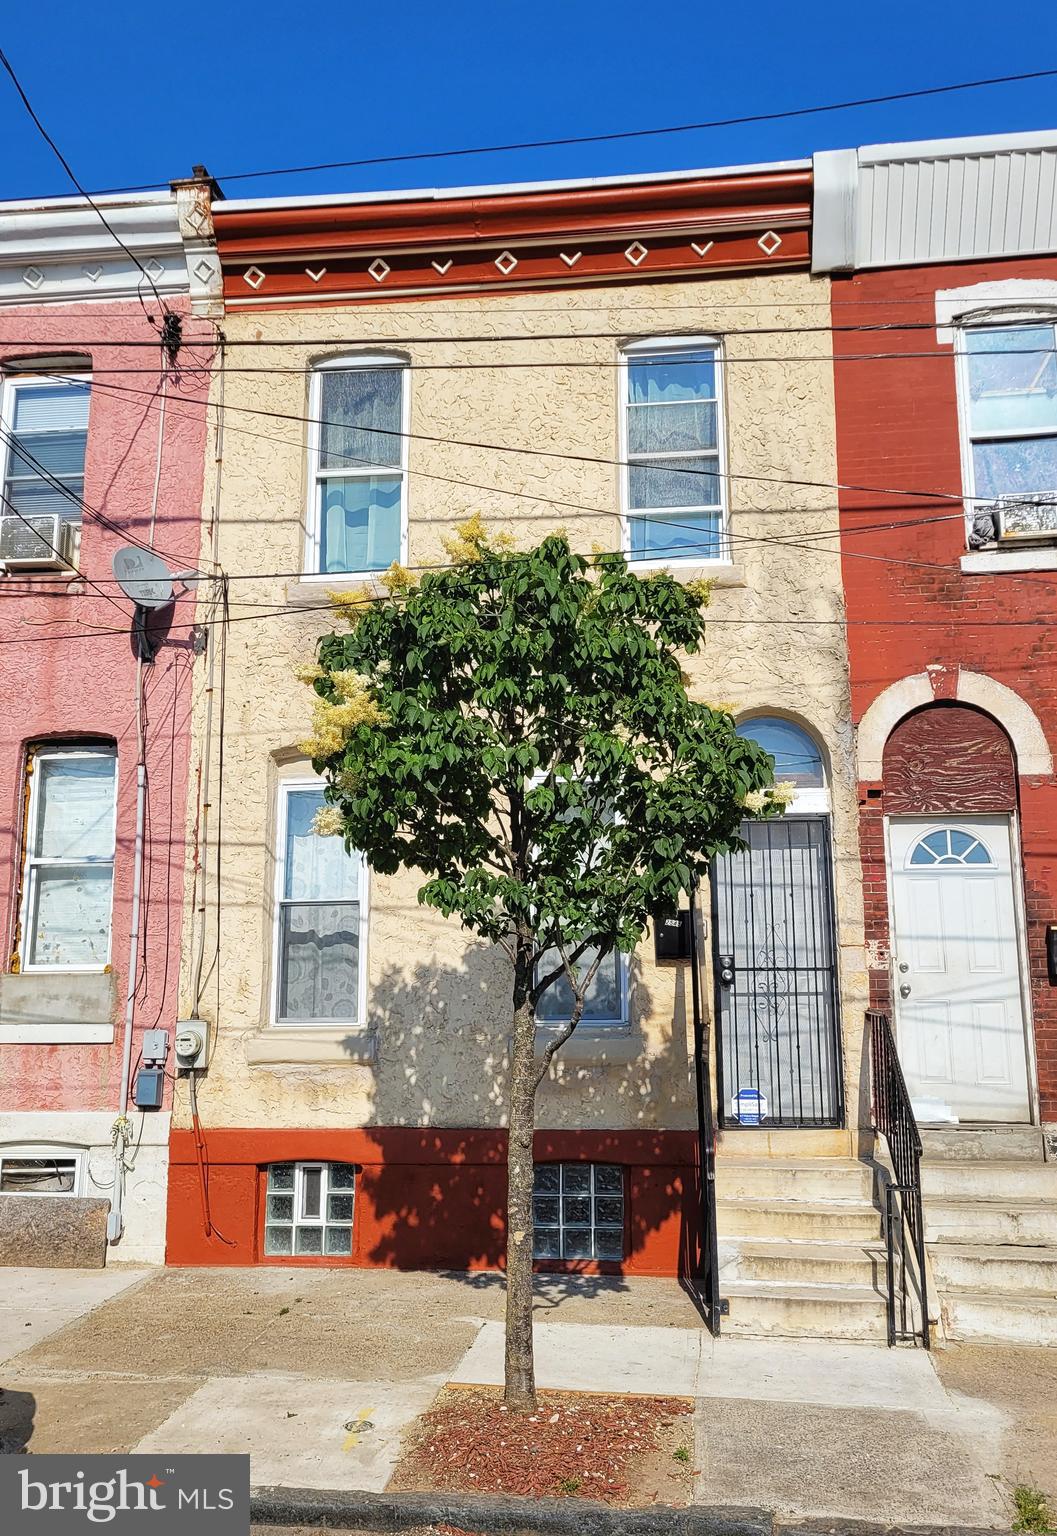 a view of a brick building with a tree